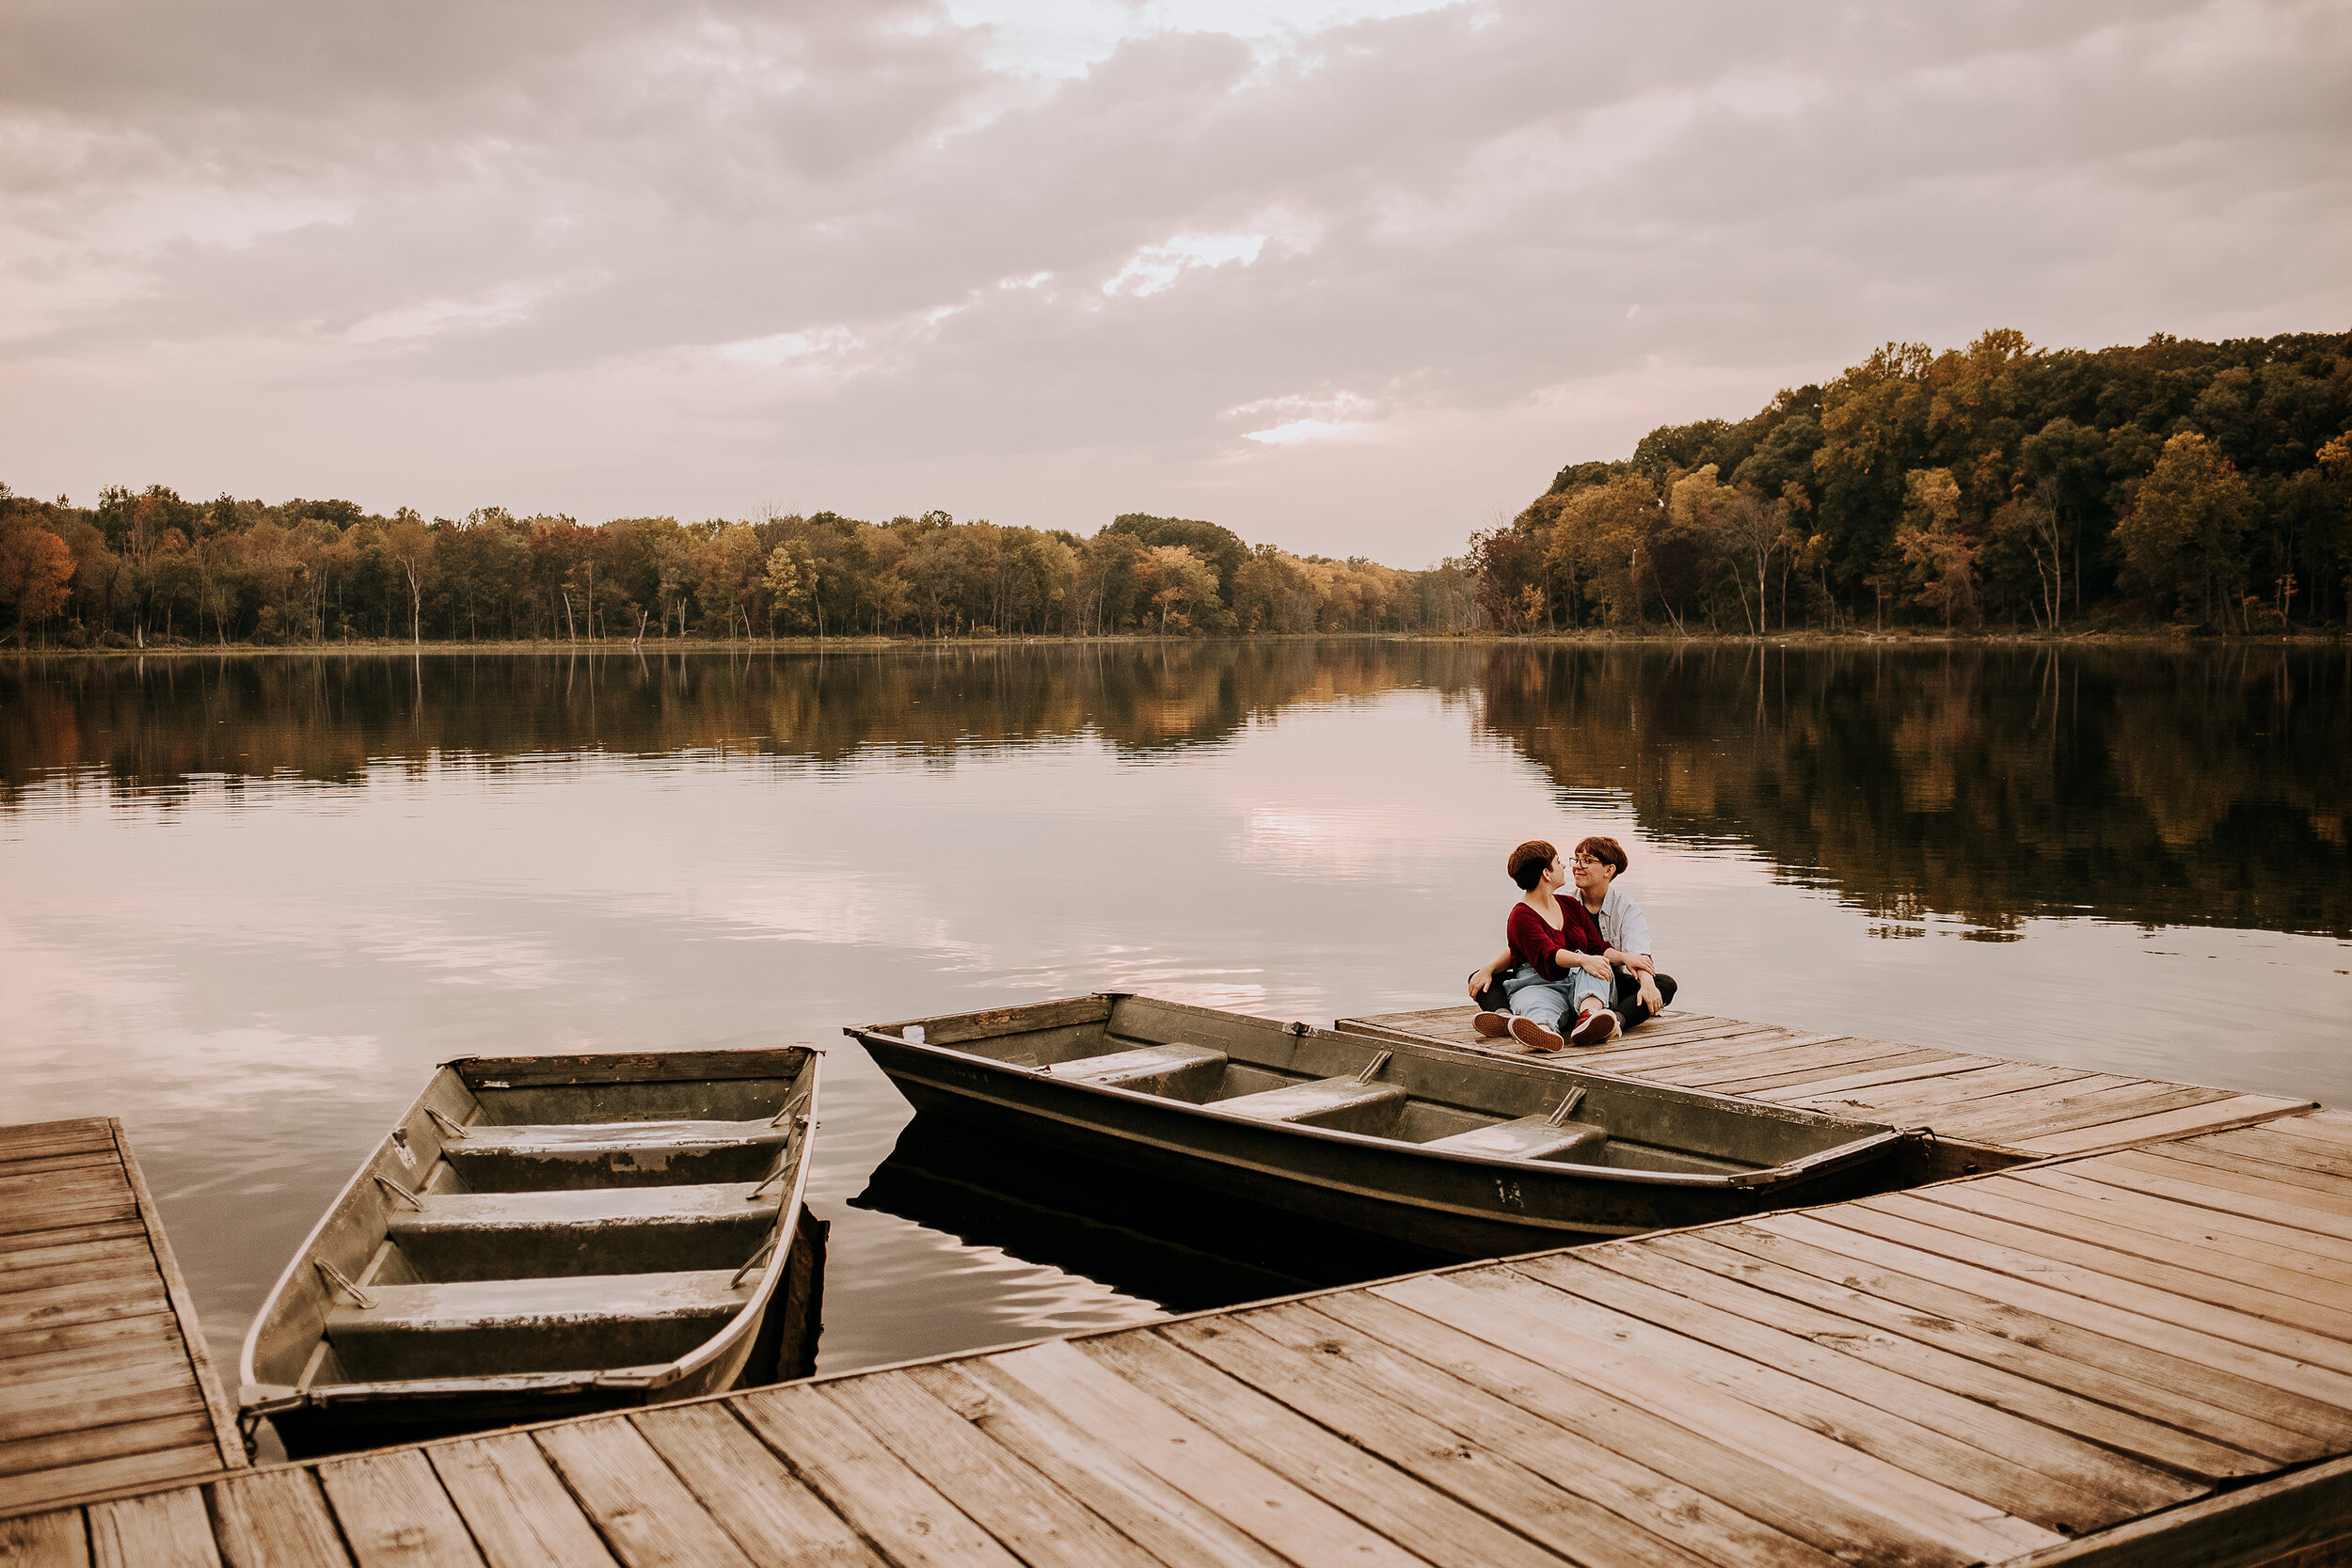  Beautiful Indiana photo location on a dock by a lake with boats with a same-sex couple wearing maroon and gray in by Kindred + Co. outdoor photoshoot locations in indiana lake with a dock and boats photoshoot locations same-sex couple engagements po